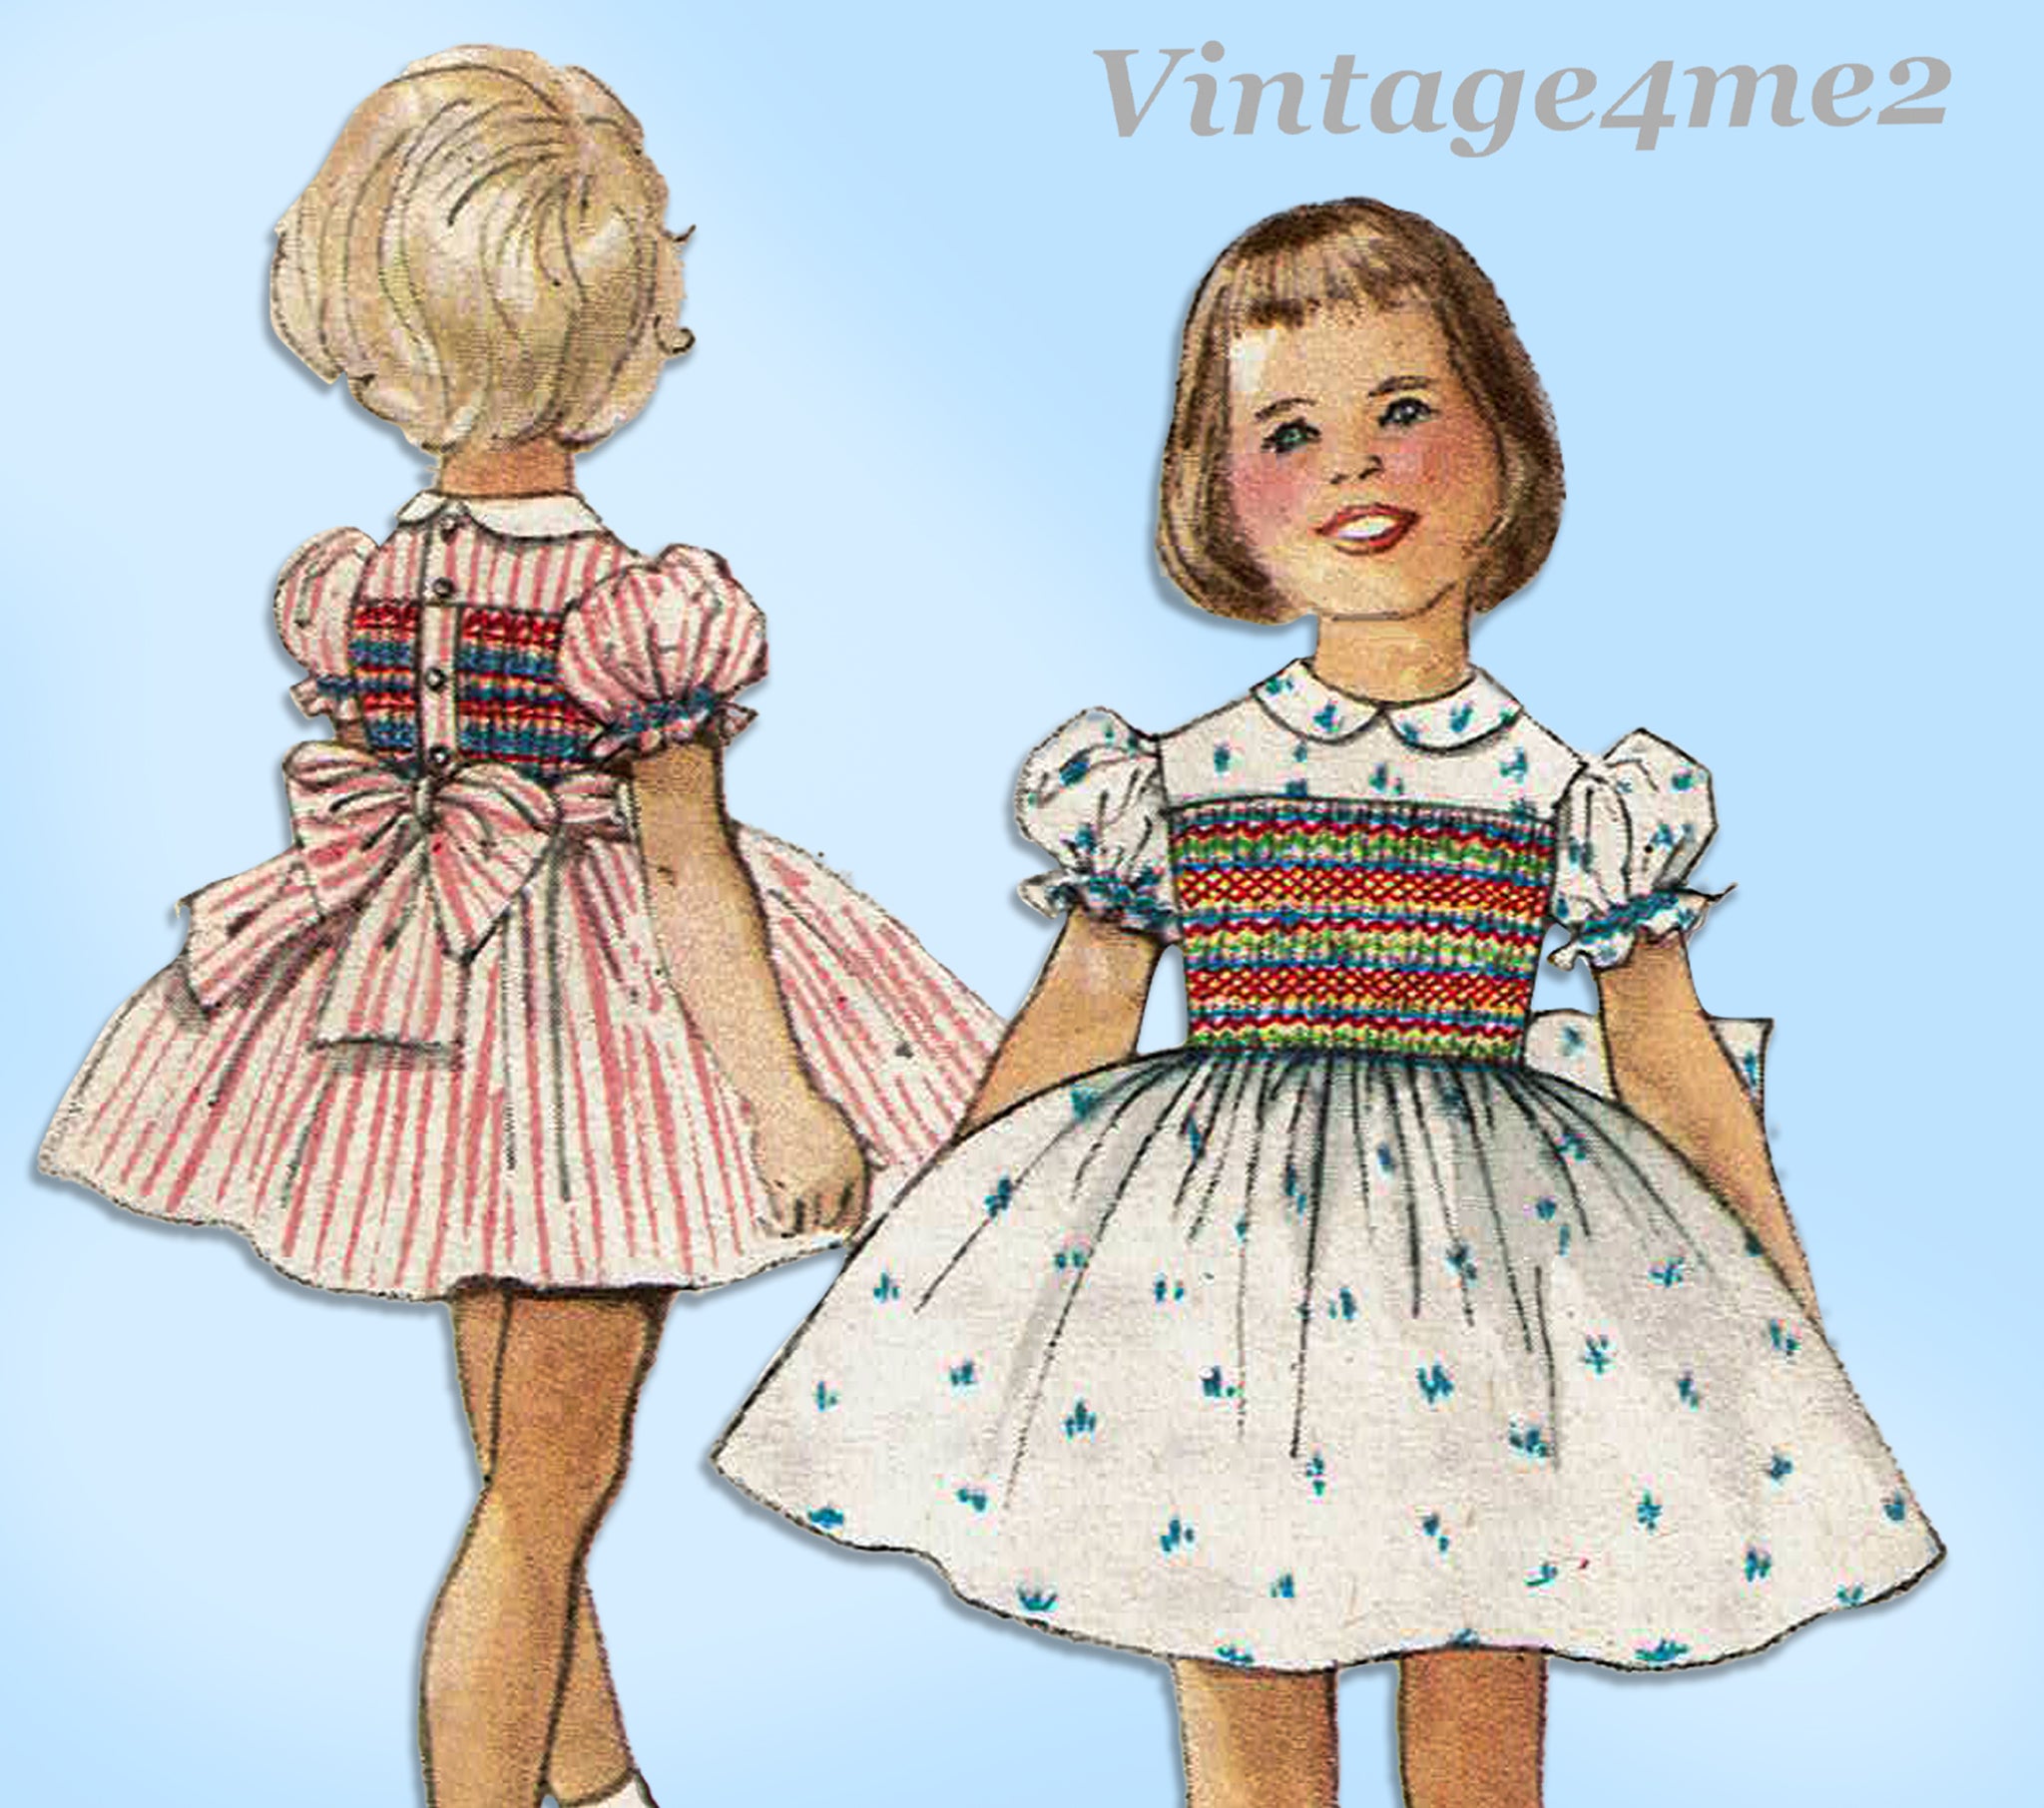 FREE PATTERN ALERT: 20+ Free Girl's Dress Patterns | On the Cutting Floor:  Printable pdf sewing patterns and tutorials for women